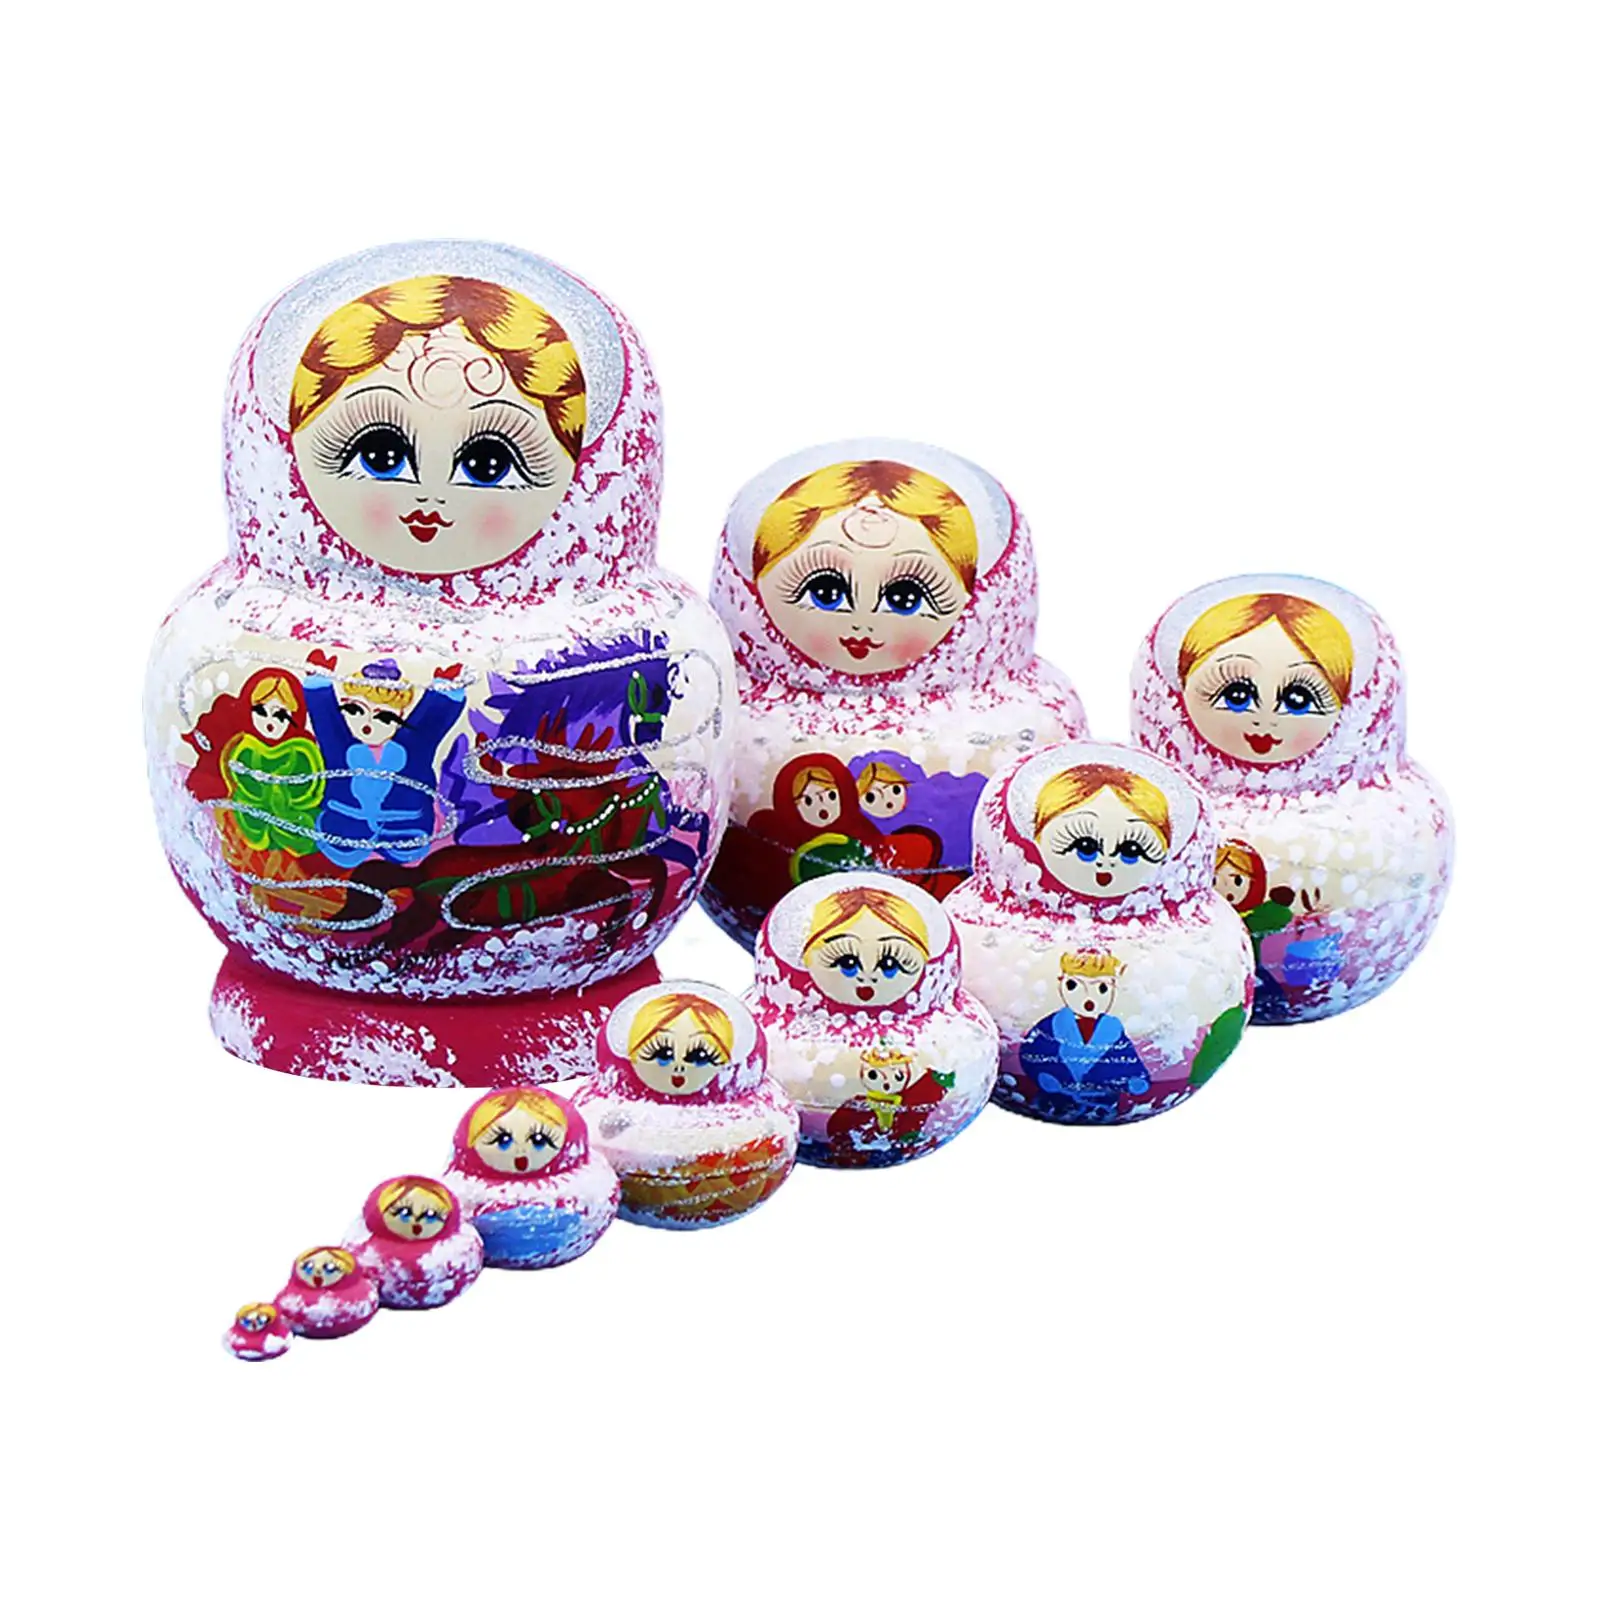 10Pcs Handmade Nesting Doll Stackable Collectible Crafts Ornament Figures Wood Russian Nesting Doll for table Office Room Kids